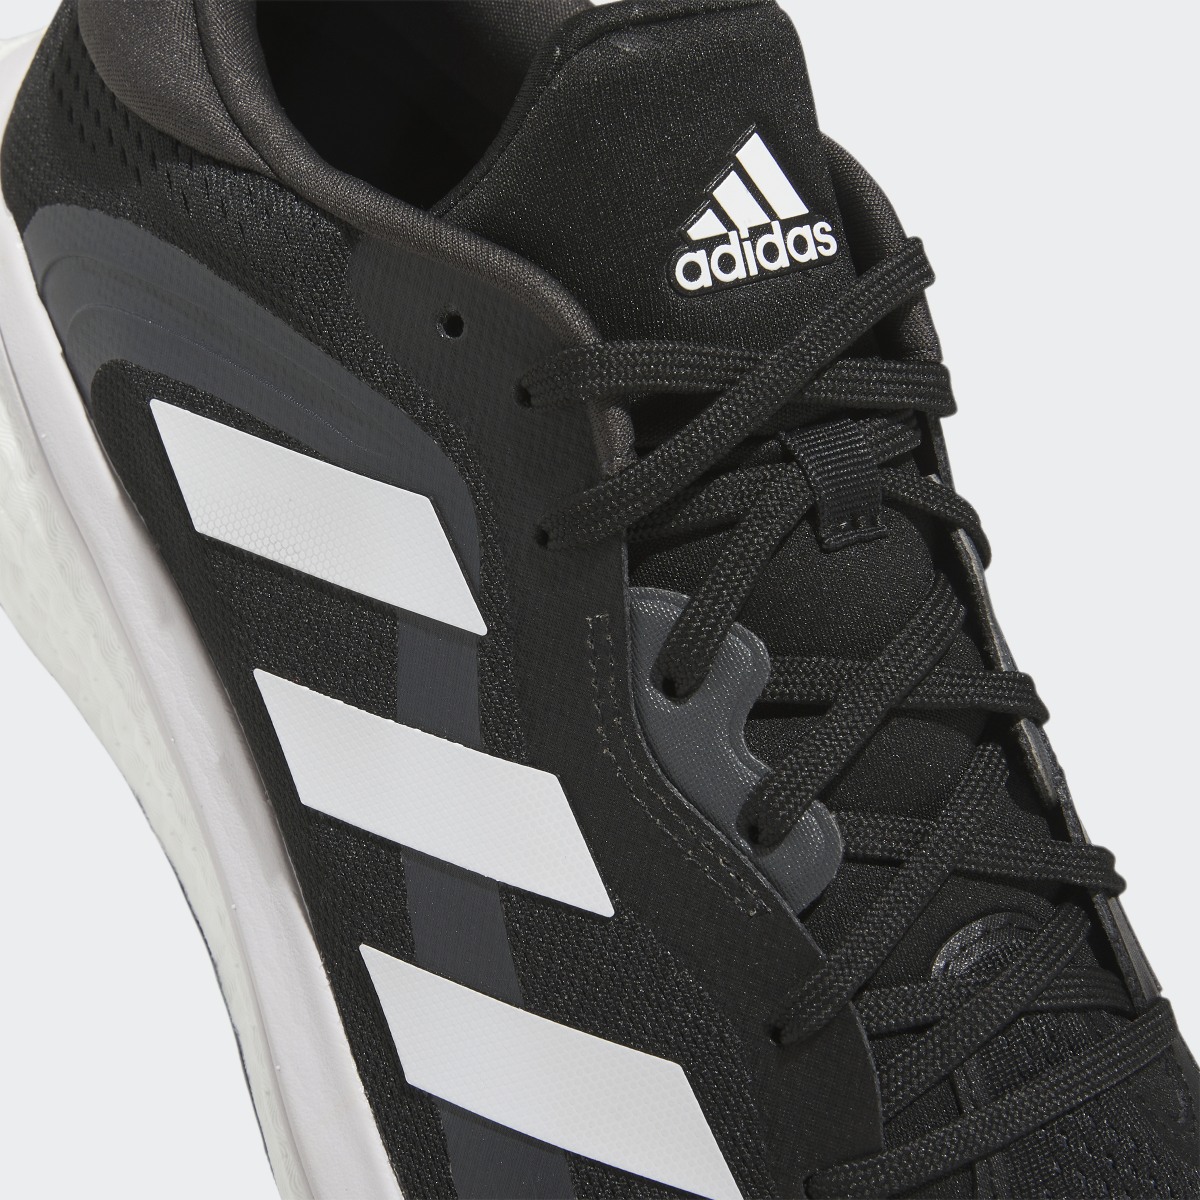 Adidas Sapatilhas SolarGlide 4 ST. 5